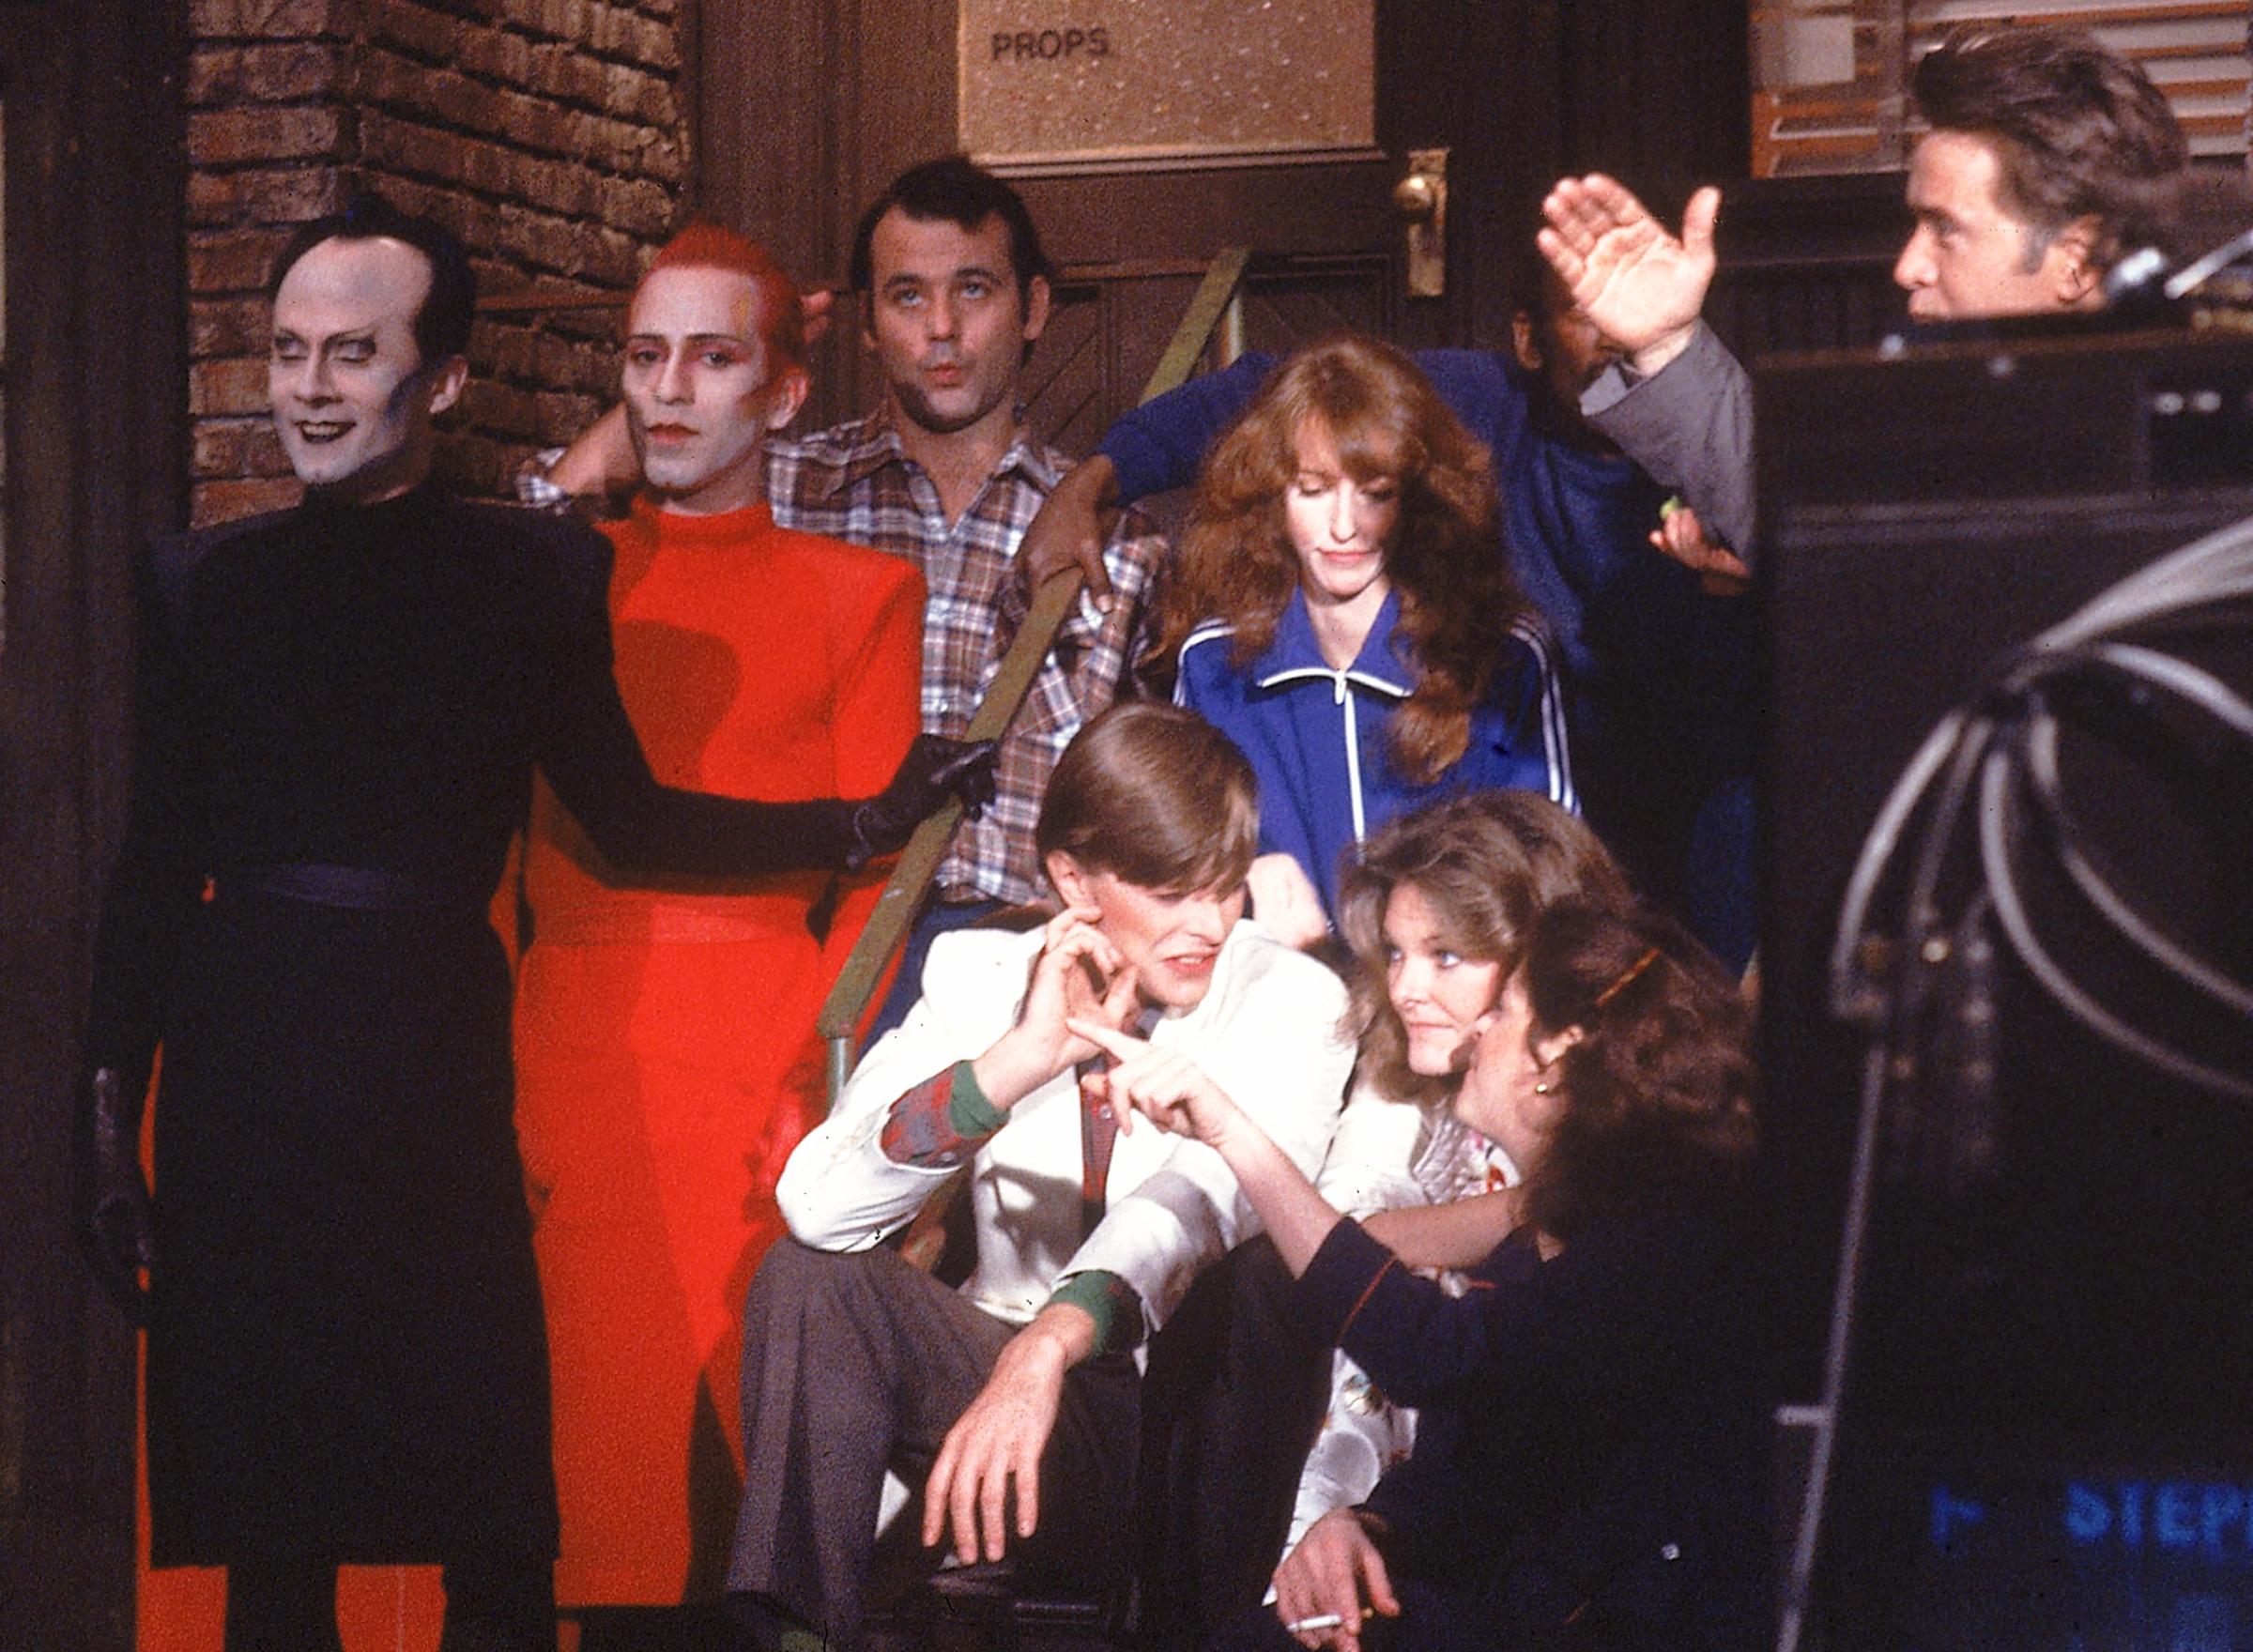 Klaus Nomi, "The Man Who Sold the World," "TVC15," and "Boys Keep Swinging" on Saturday Night Live, 1980.